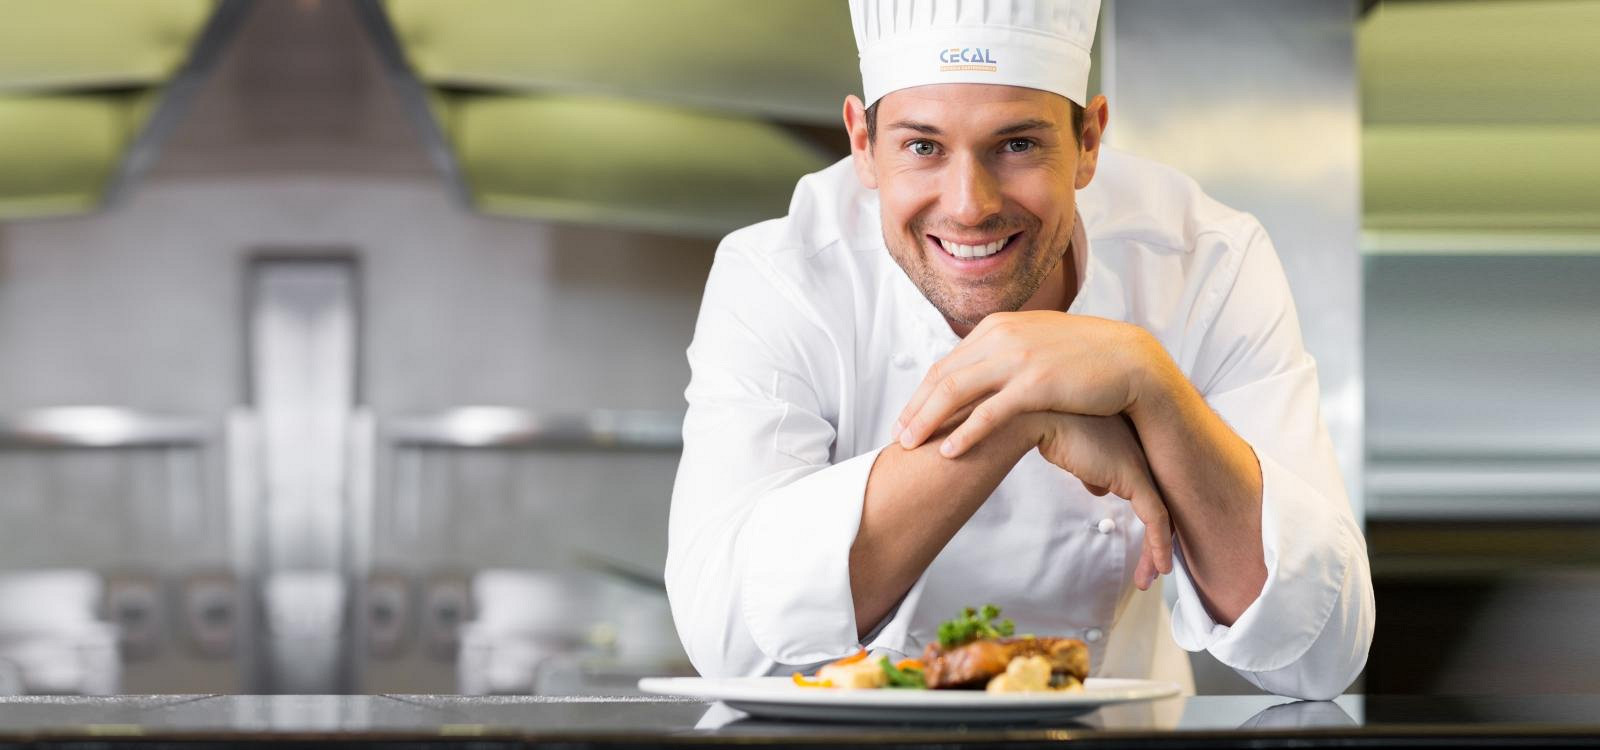 CHEF PROFESIONAL | CECAL